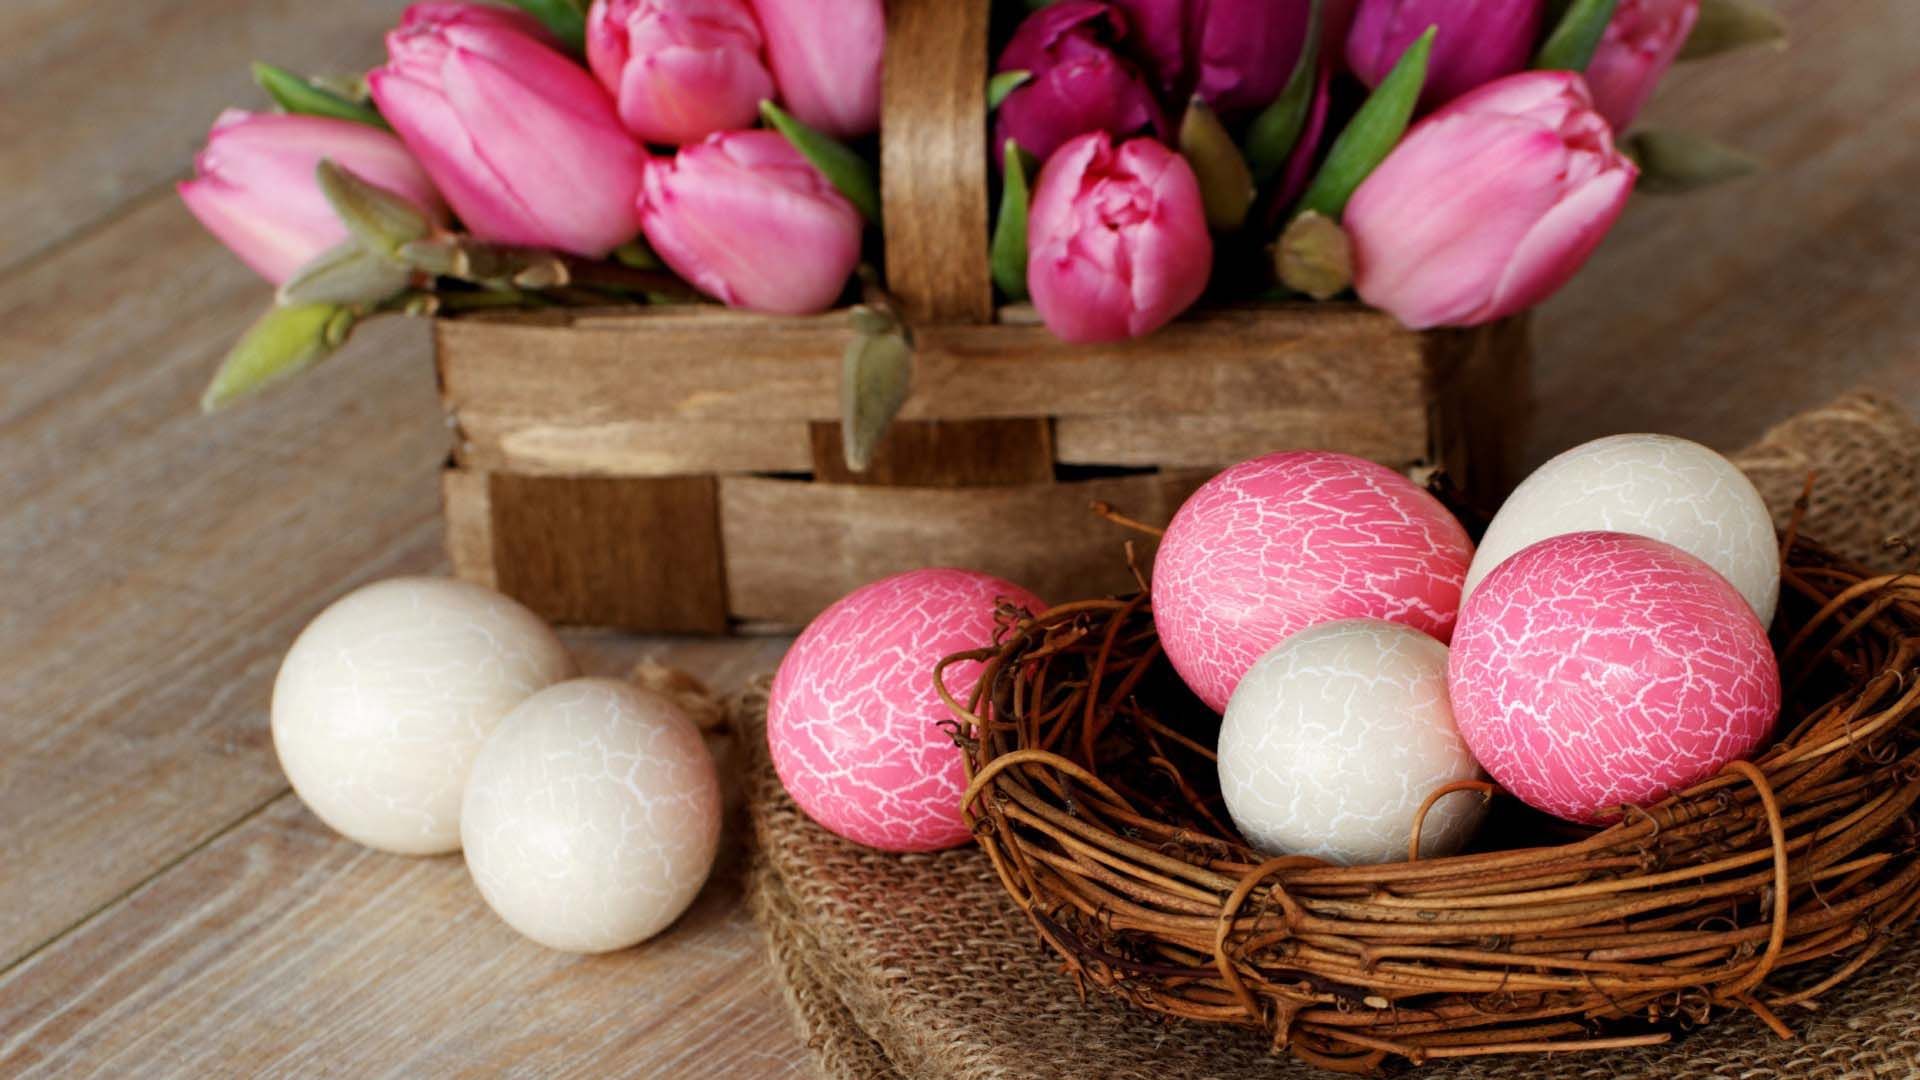 Hapy Easter White And Pink Eggs For Easter Wallpaper (Изображение JPEG, 1920 × 1080 пикселов). Easter Wallpaper, Easter Eggs, Easter Background